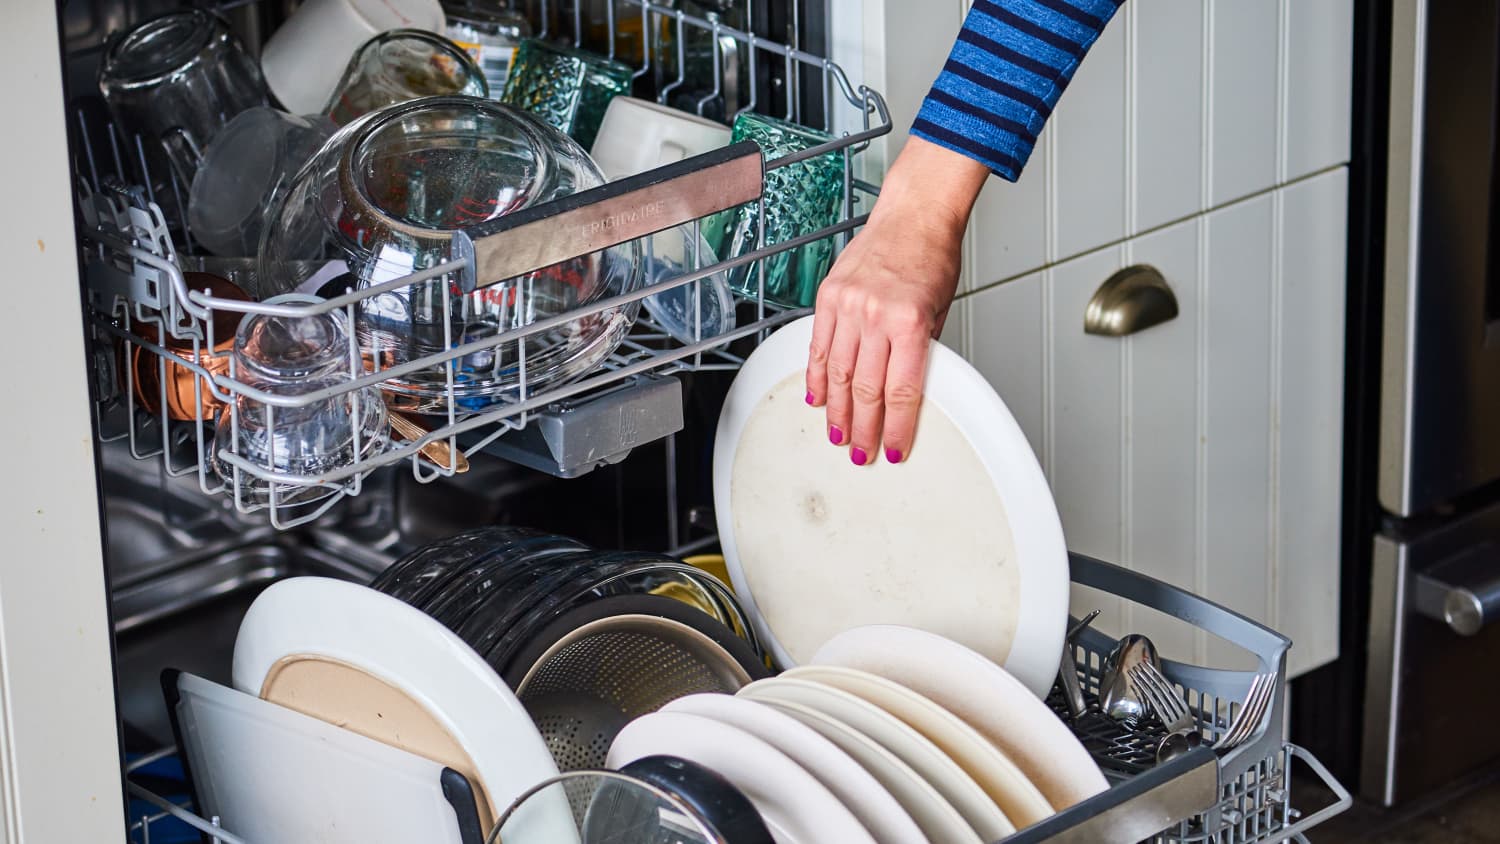 Should you rinse your dishes before putting them in the dishwasher?